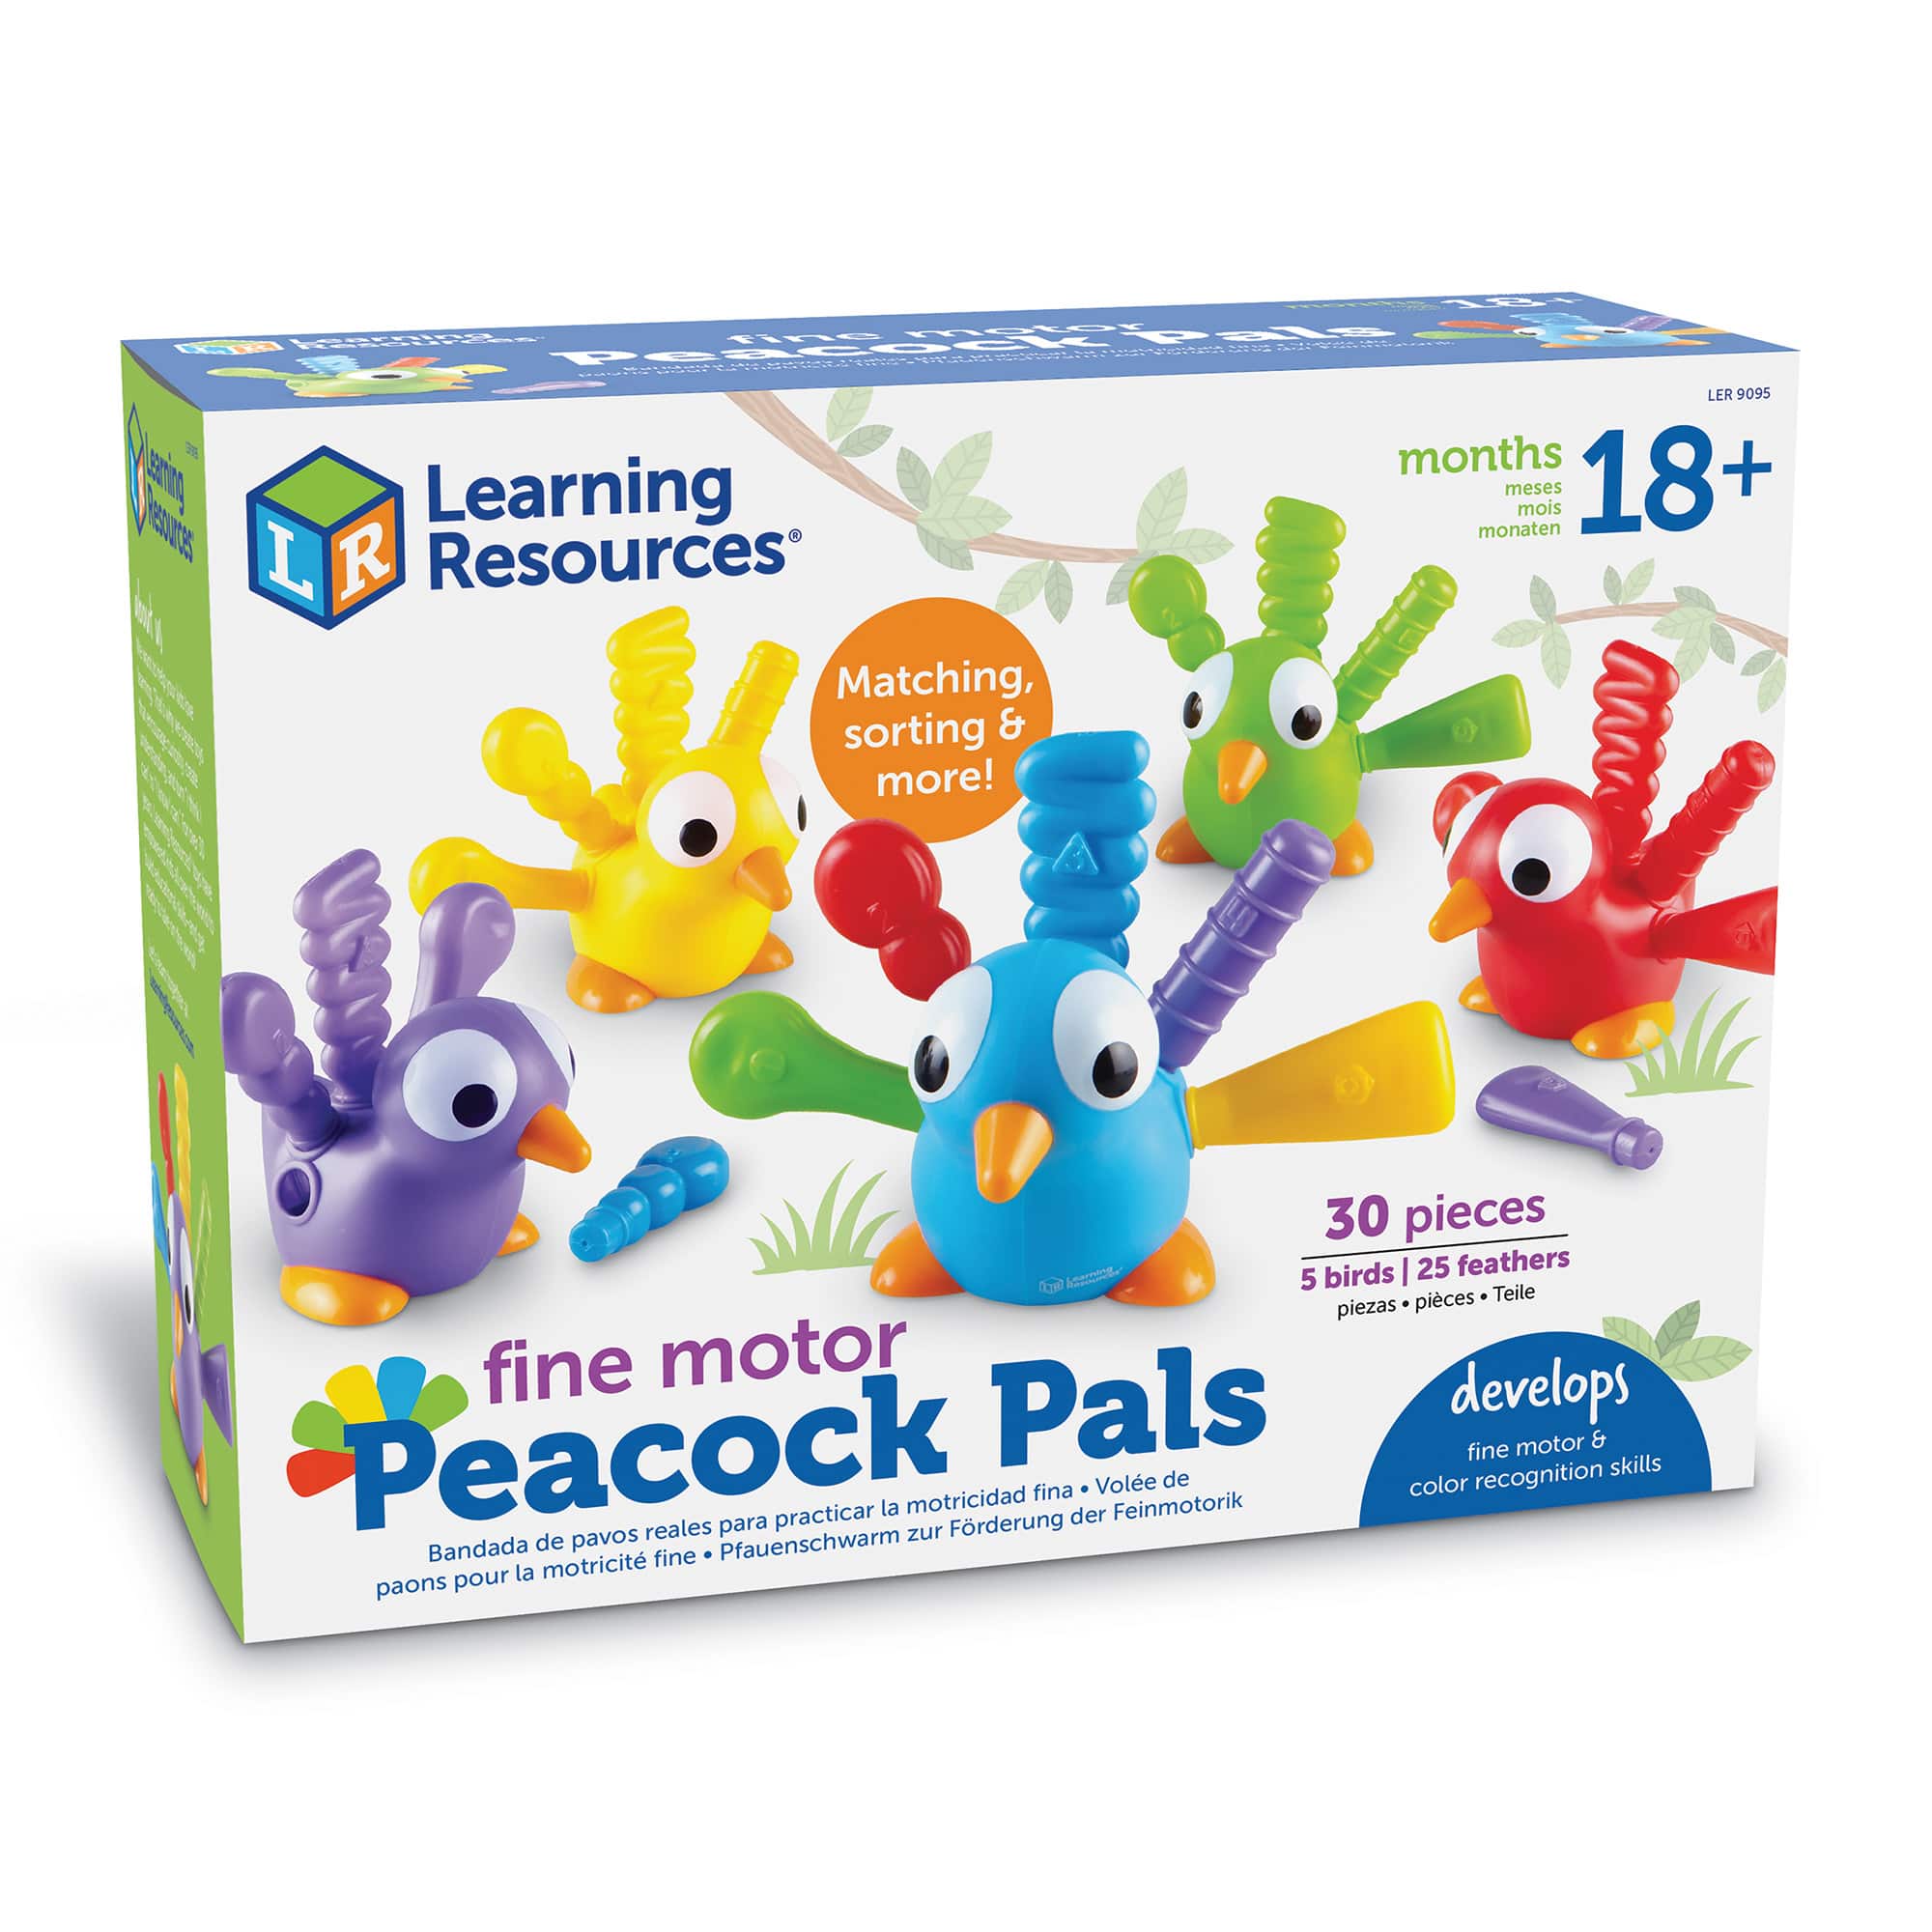 6 Pieces Learning Resources LER9094 Pedro the Fine Motor Peacock Ages 18 Months 